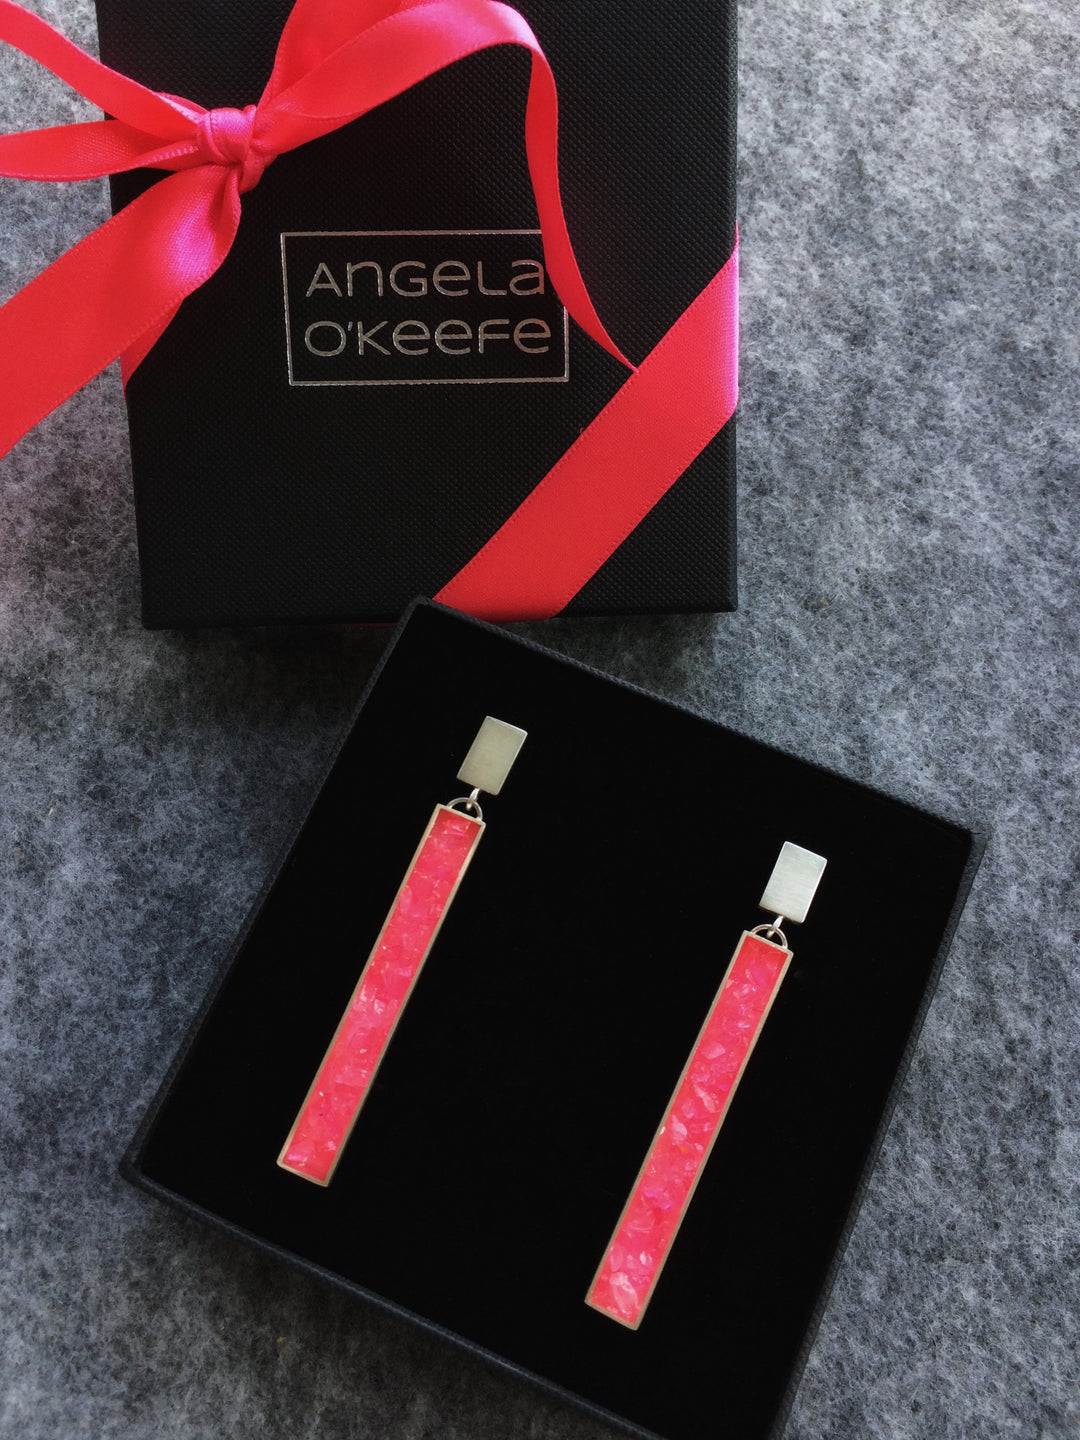 The Collective Dublin - Home to Irish Design - Angela O'Keefe : Neon Pink Resin & Silver Earrings